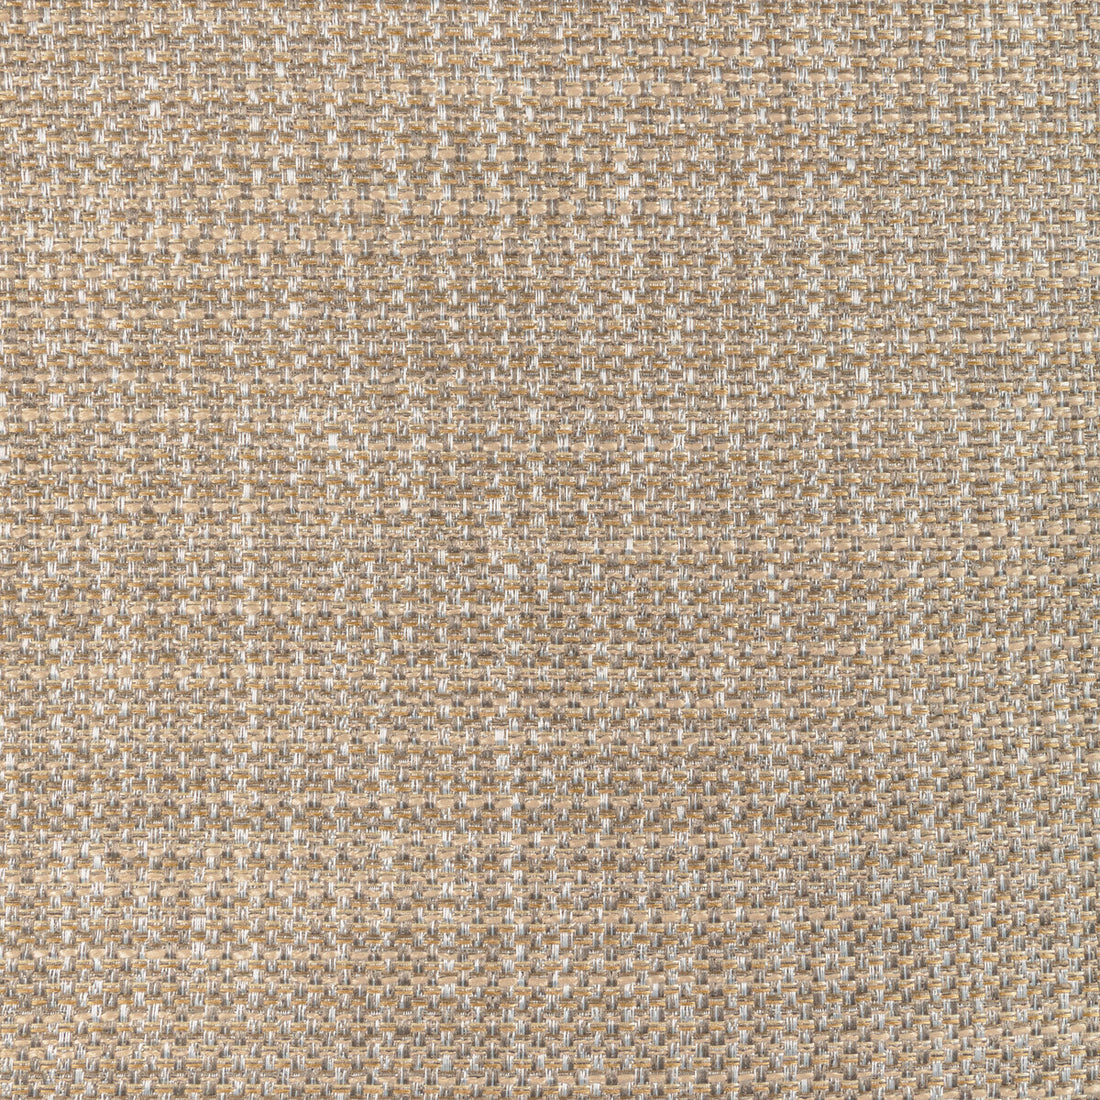 Luma Texture fabric in putty color - pattern 4947.1611.0 - by Kravet Contract in the Fr Window Luma Texture collection